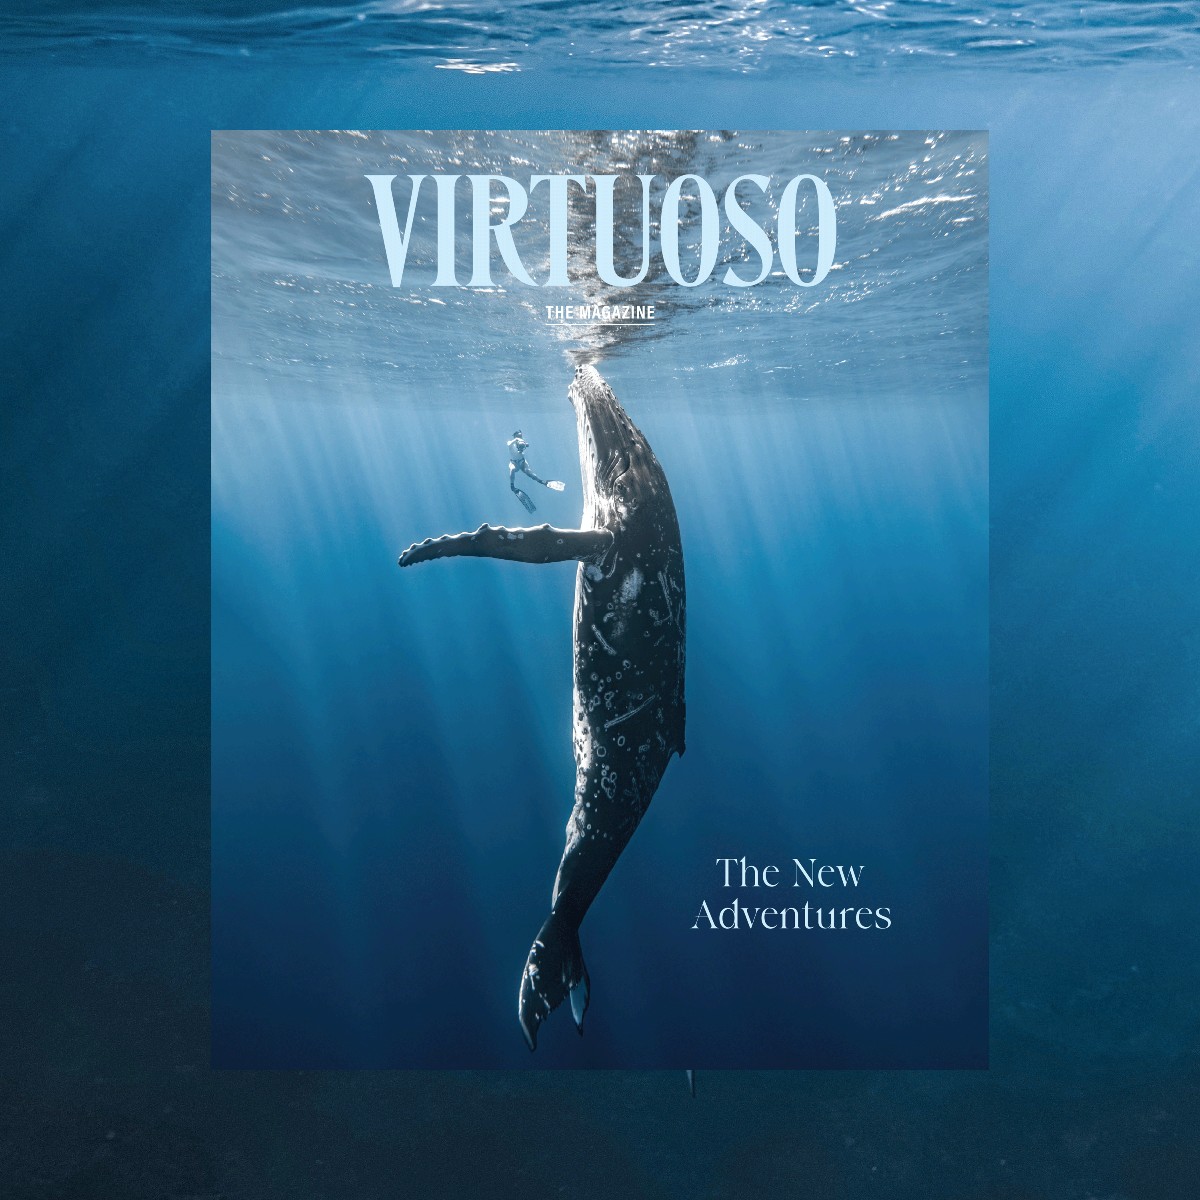 The May/June Virtuoso, The Magazine captures the combination of kismet and careful planning that goes into making travel magic, such as snorkeling with 40-ton marine mammals. To get the latest issue, connect with a travel advisor. ➡️ virtuoso.ltd/traveladvisors 📷: Rachel Moore